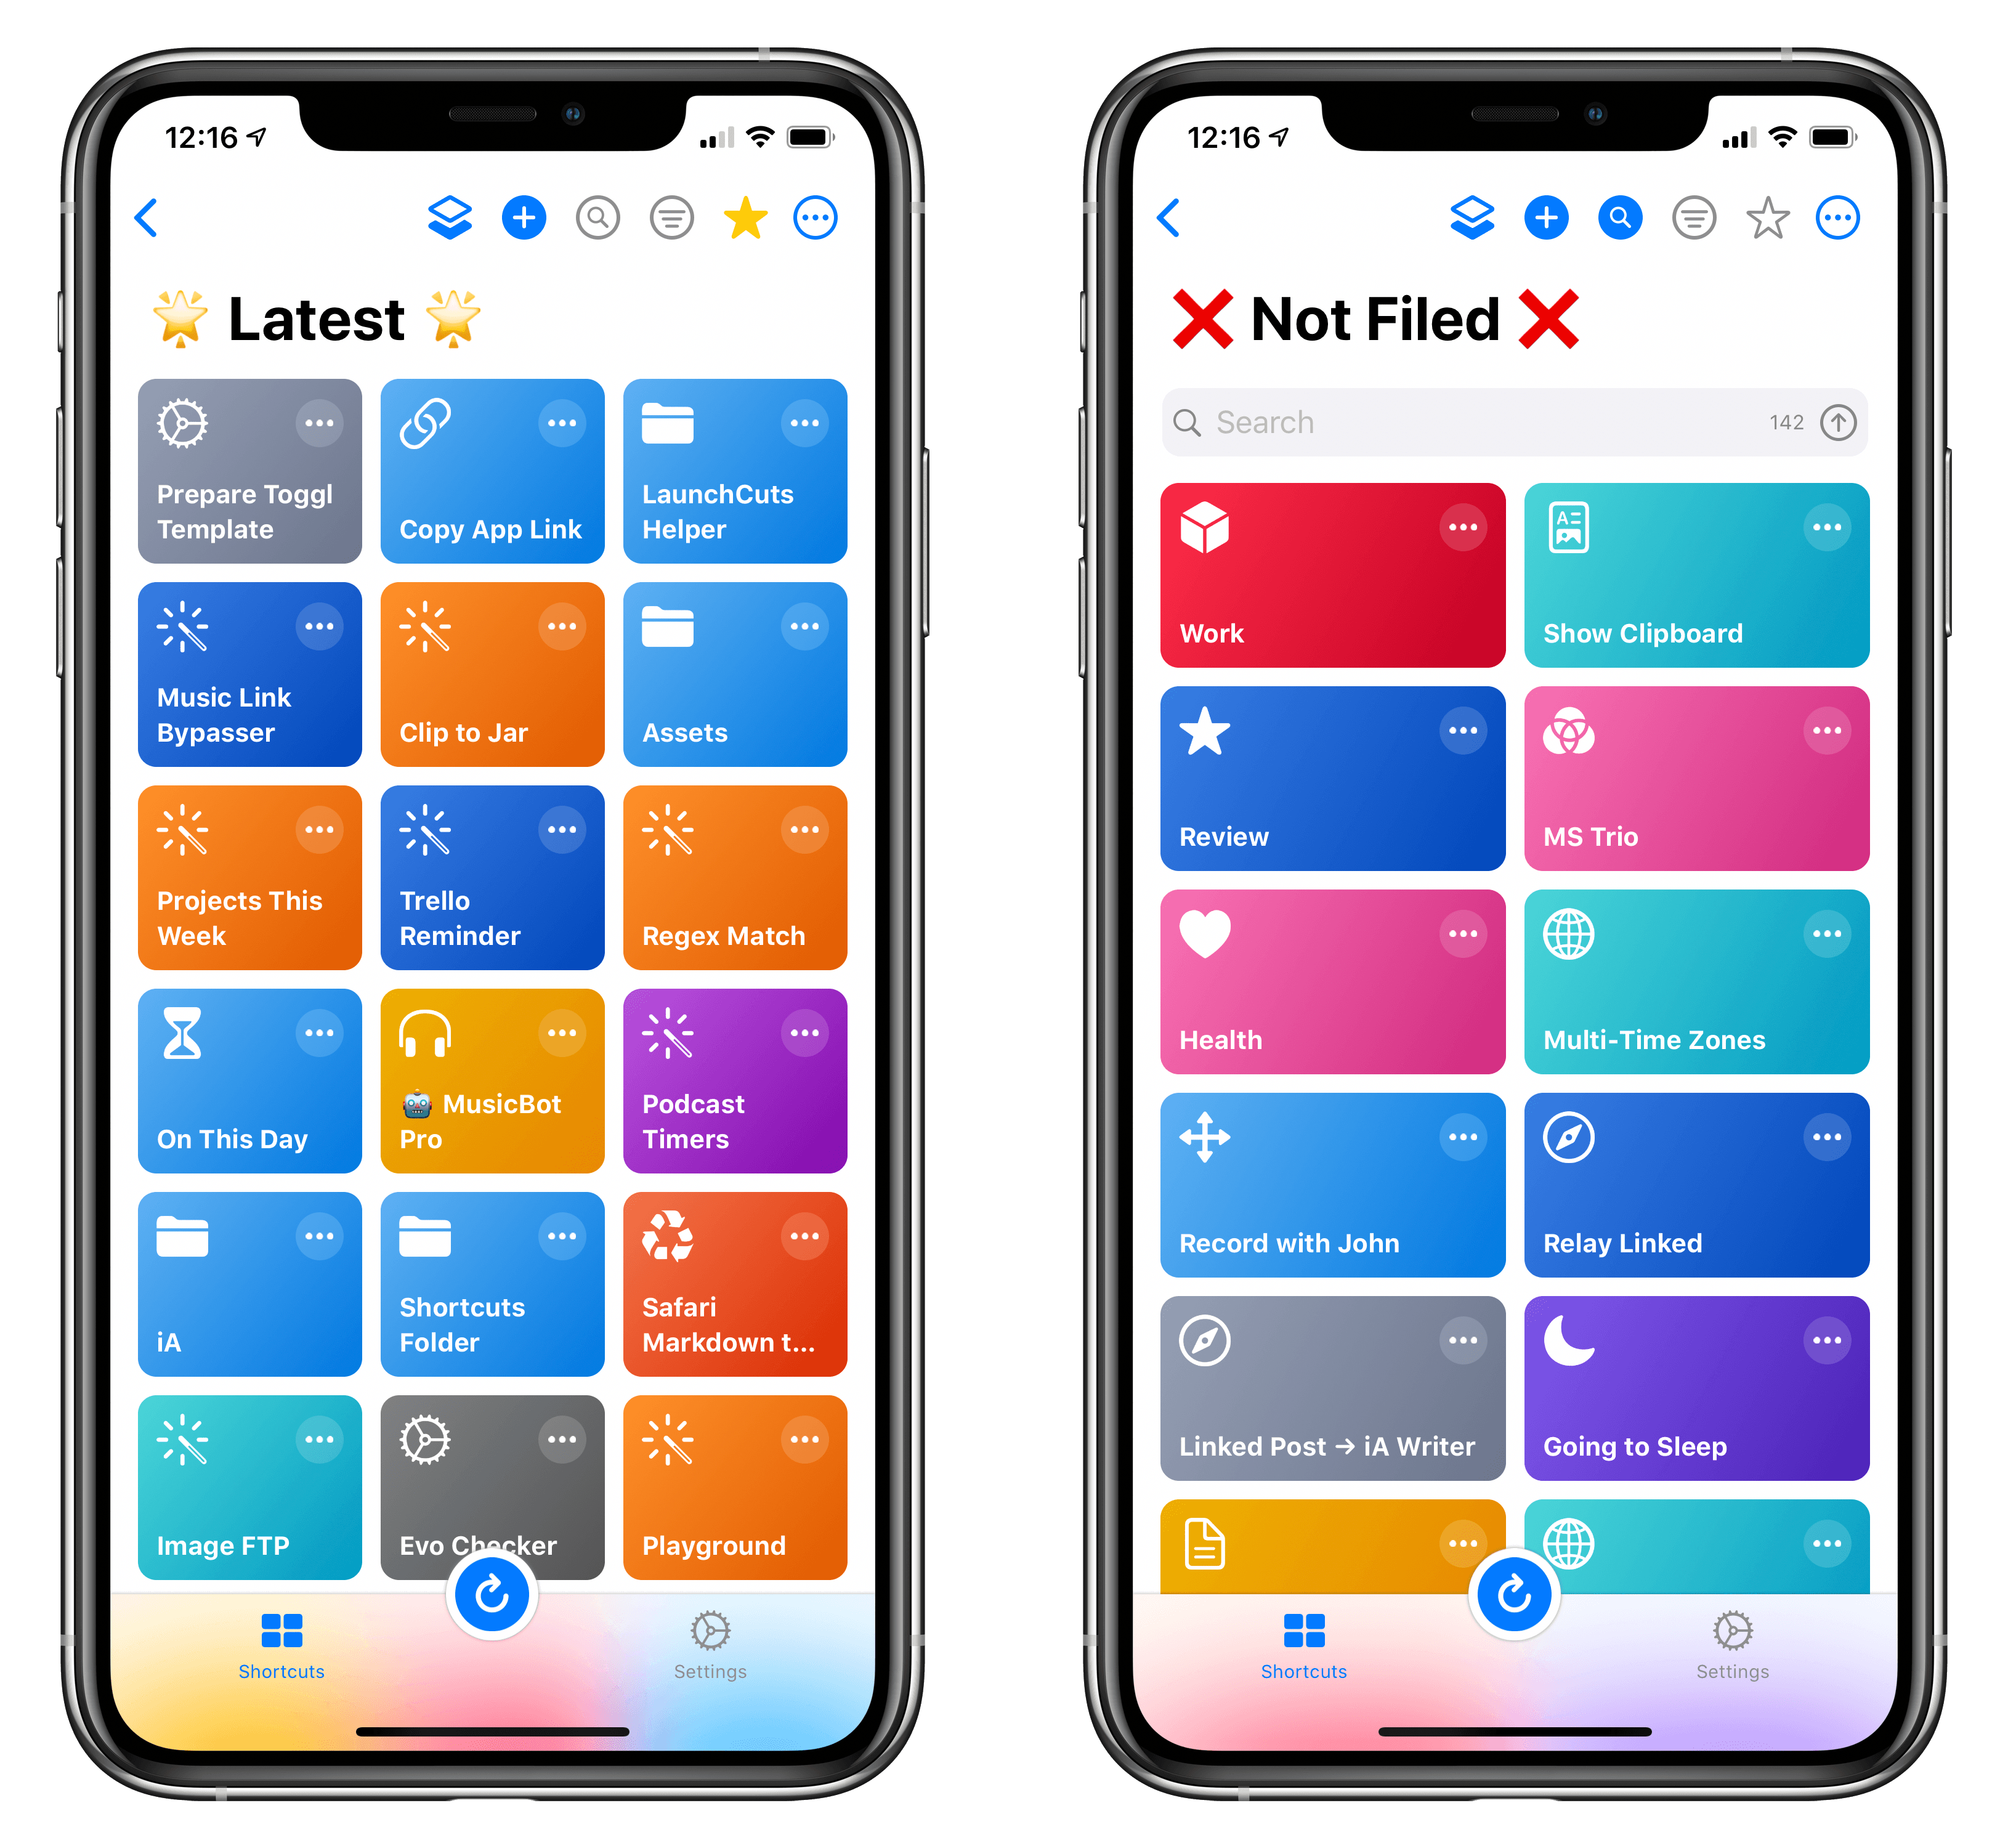 Two smart folders I also use in LaunchCuts.